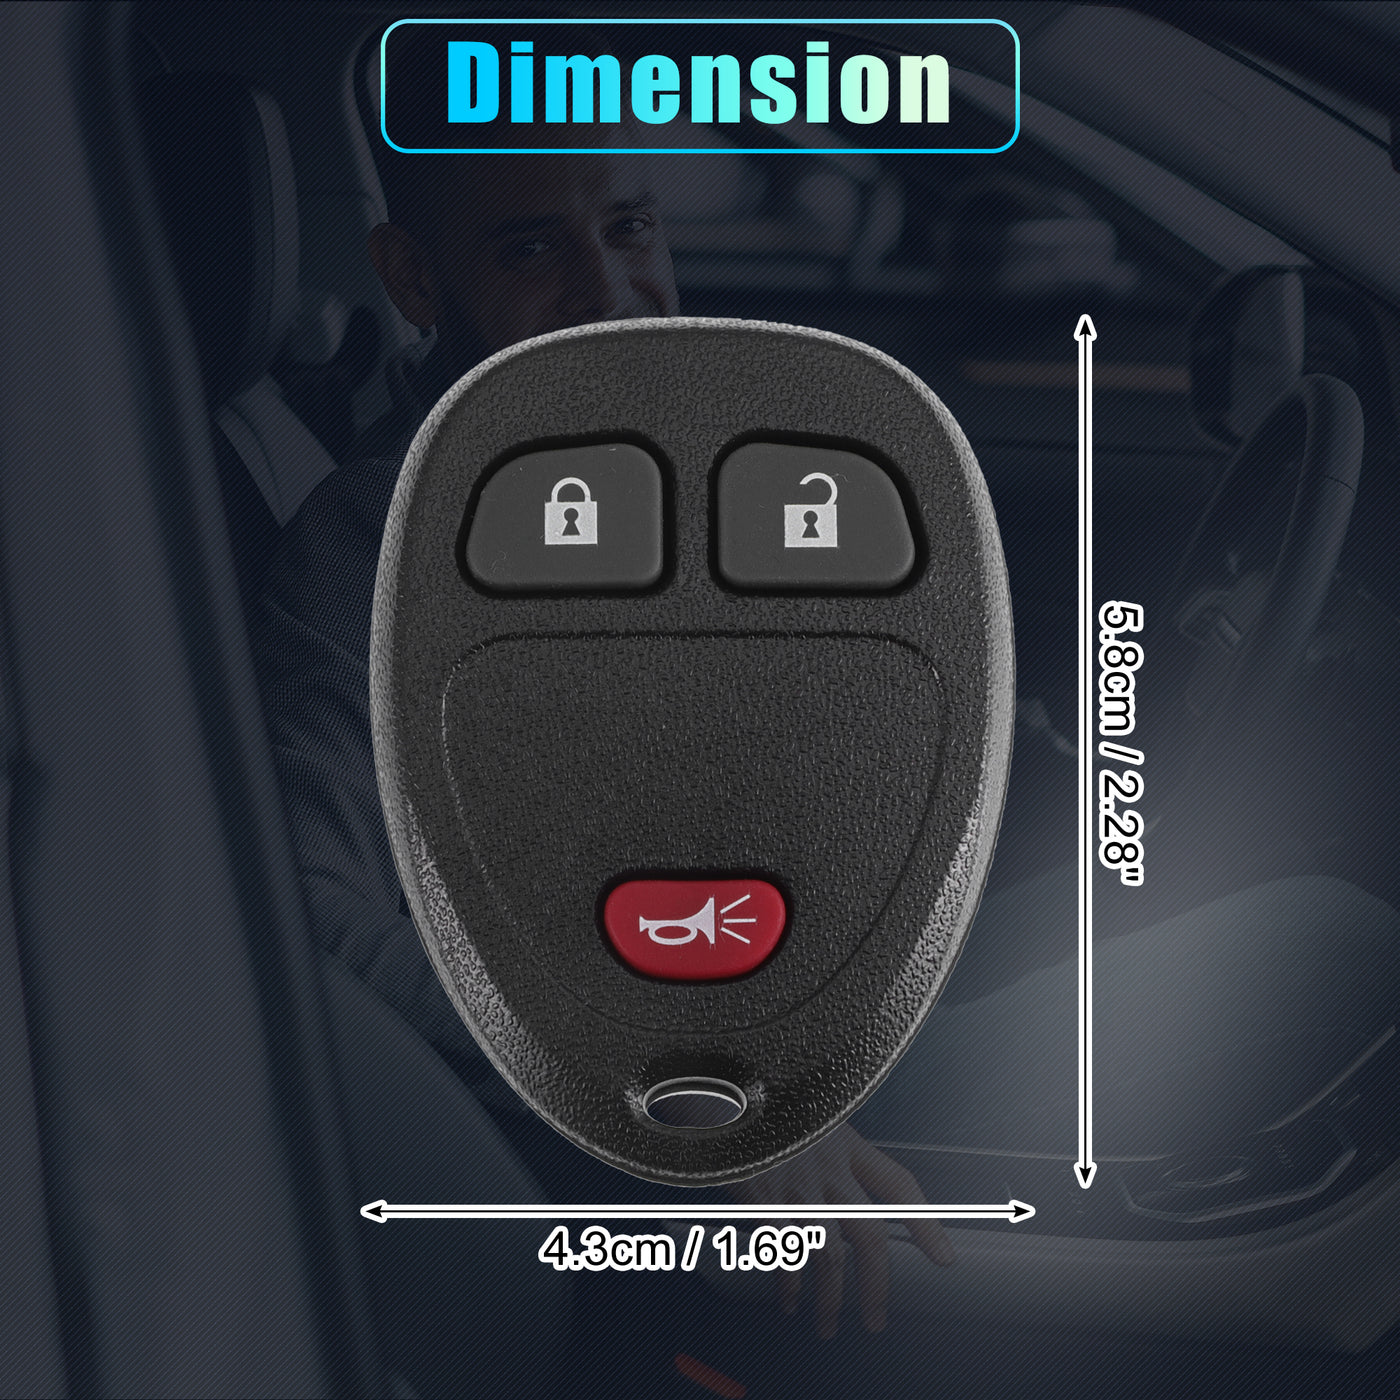 X AUTOHAUX KOBGT04A 315MHz Keyless Entry Remote Ignition Transponder Key Fob for Chevrolet HHR 2006-2011 for Chevy Uplander 2006-2008 for Buick Terraza 2006-2007 3 Buttons